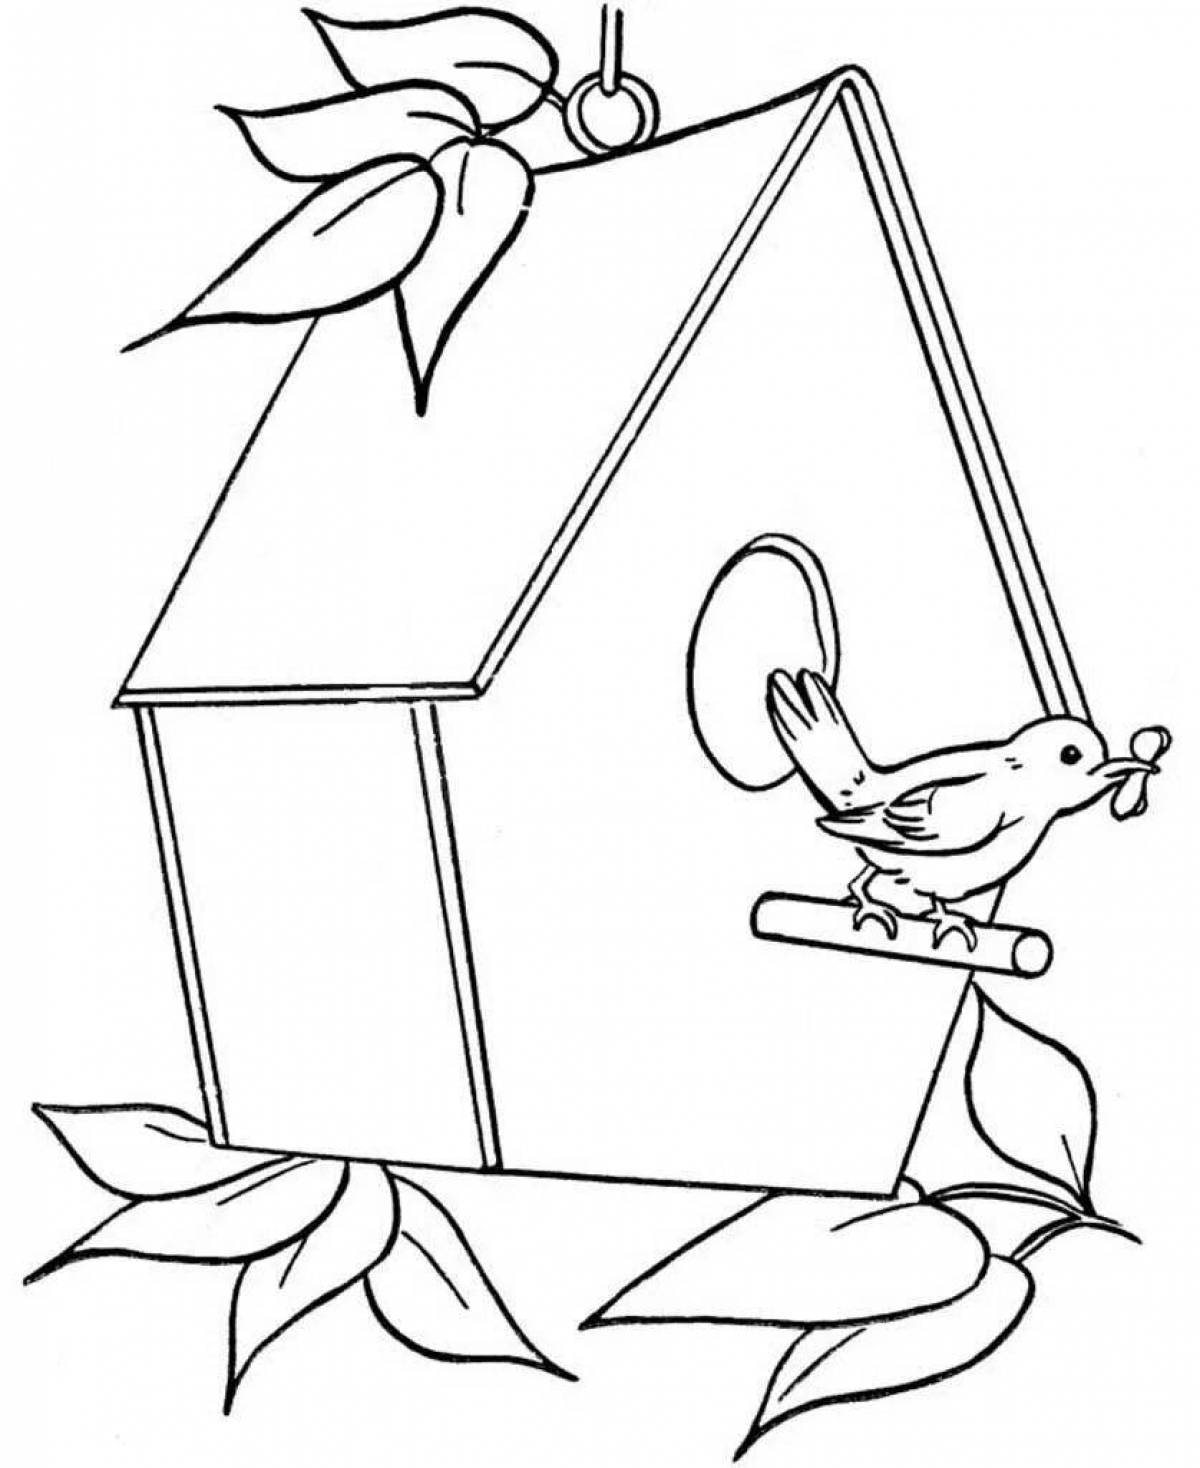 Coloring birdhouse with colored splashes for children